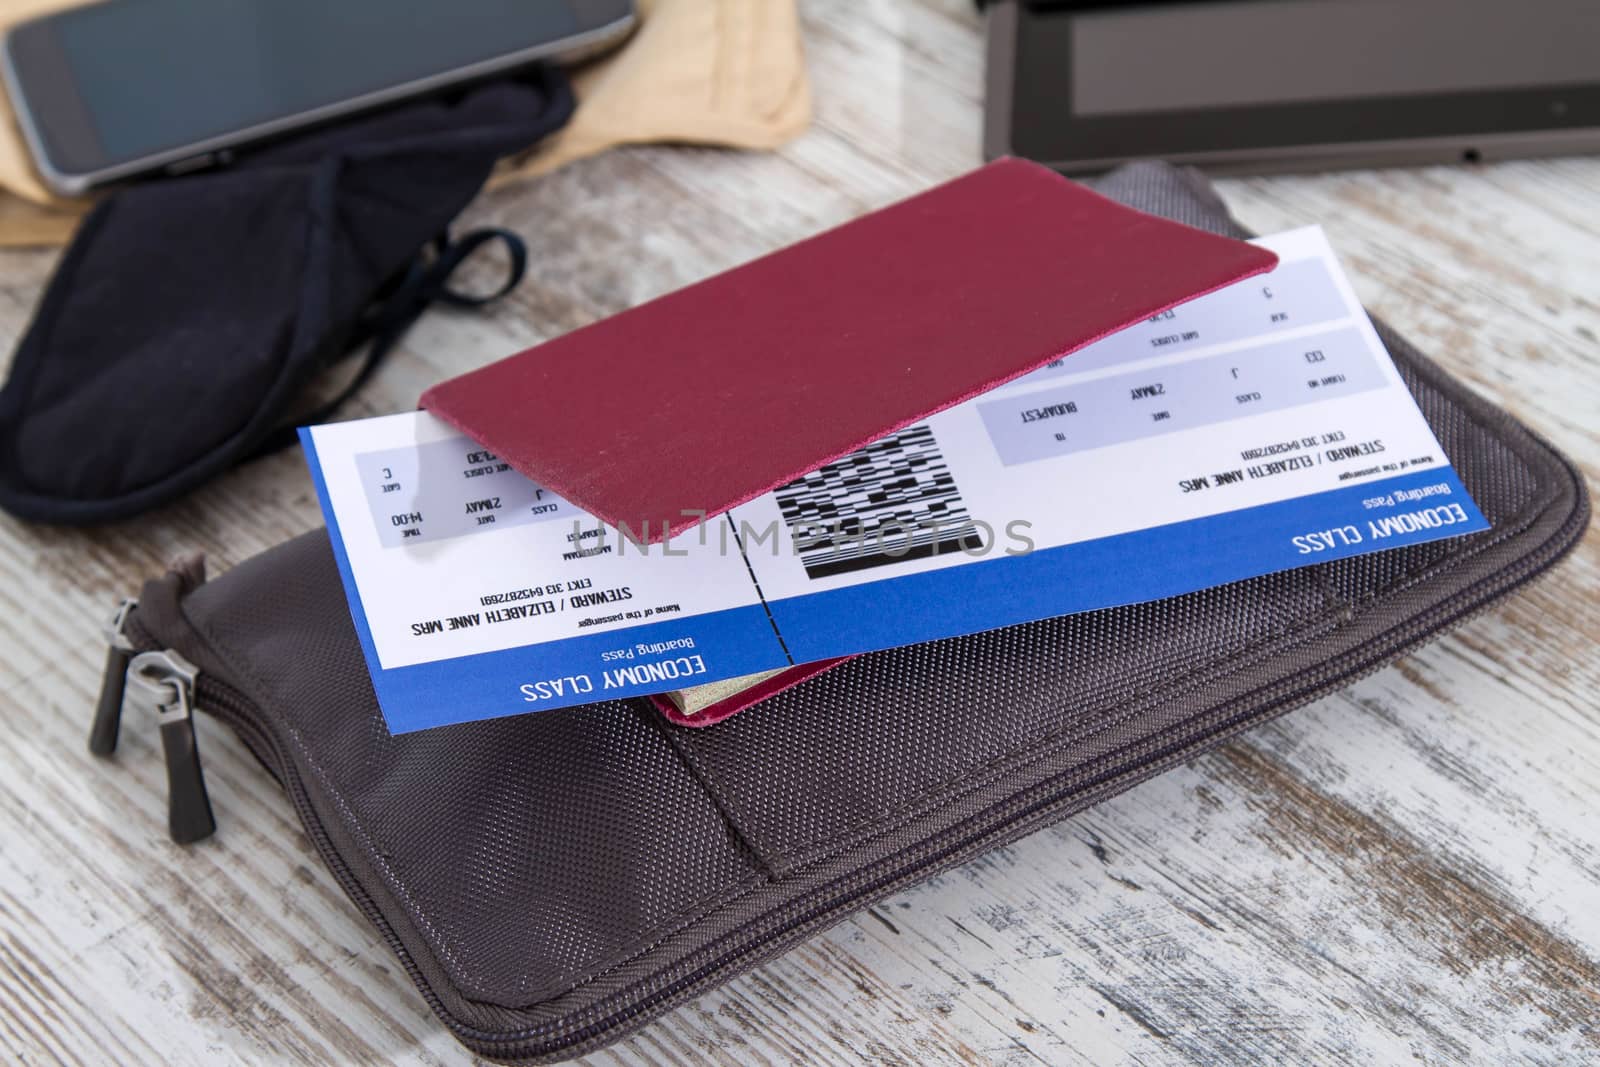 Airline ticket, passport and electronics, preparing to travel
